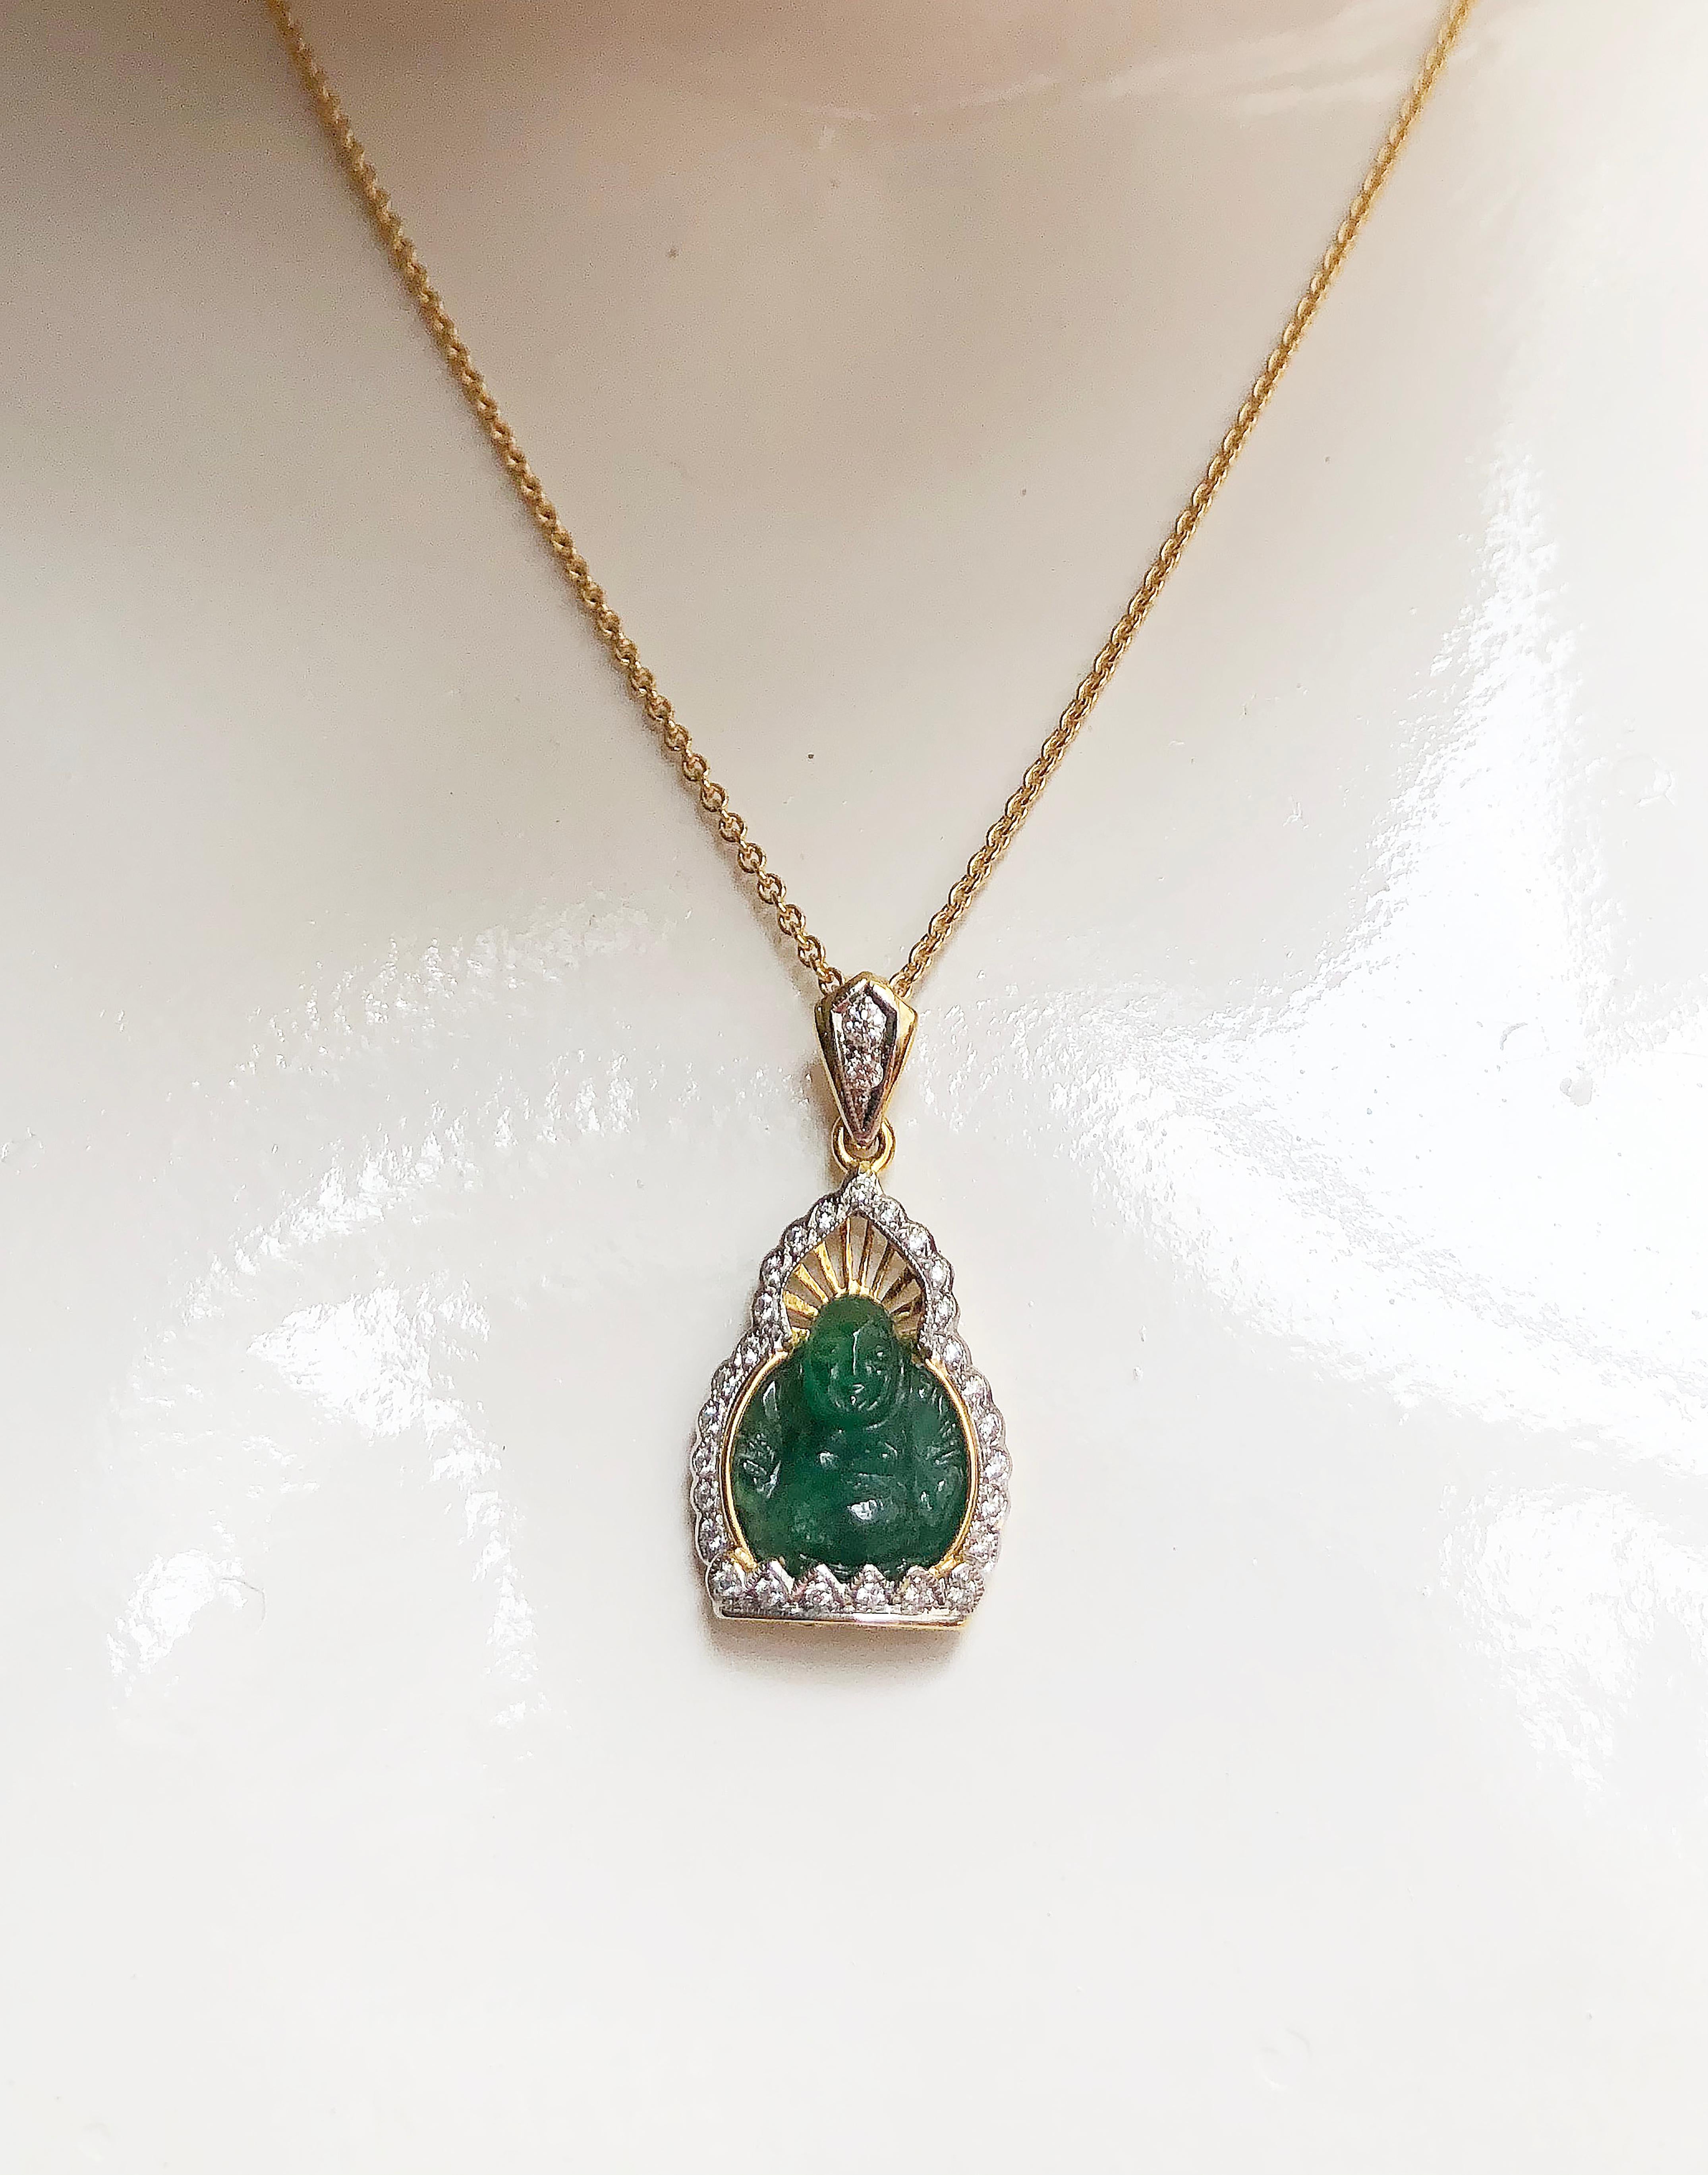 Emerald 4.22 carats with Diamond 0.19 carat Pendant set in 18 Karat Gold Settings
(chain not included)

Width:  1.4 cm 
Length: 2.7 cm
Total Weight: 3.18 grams

